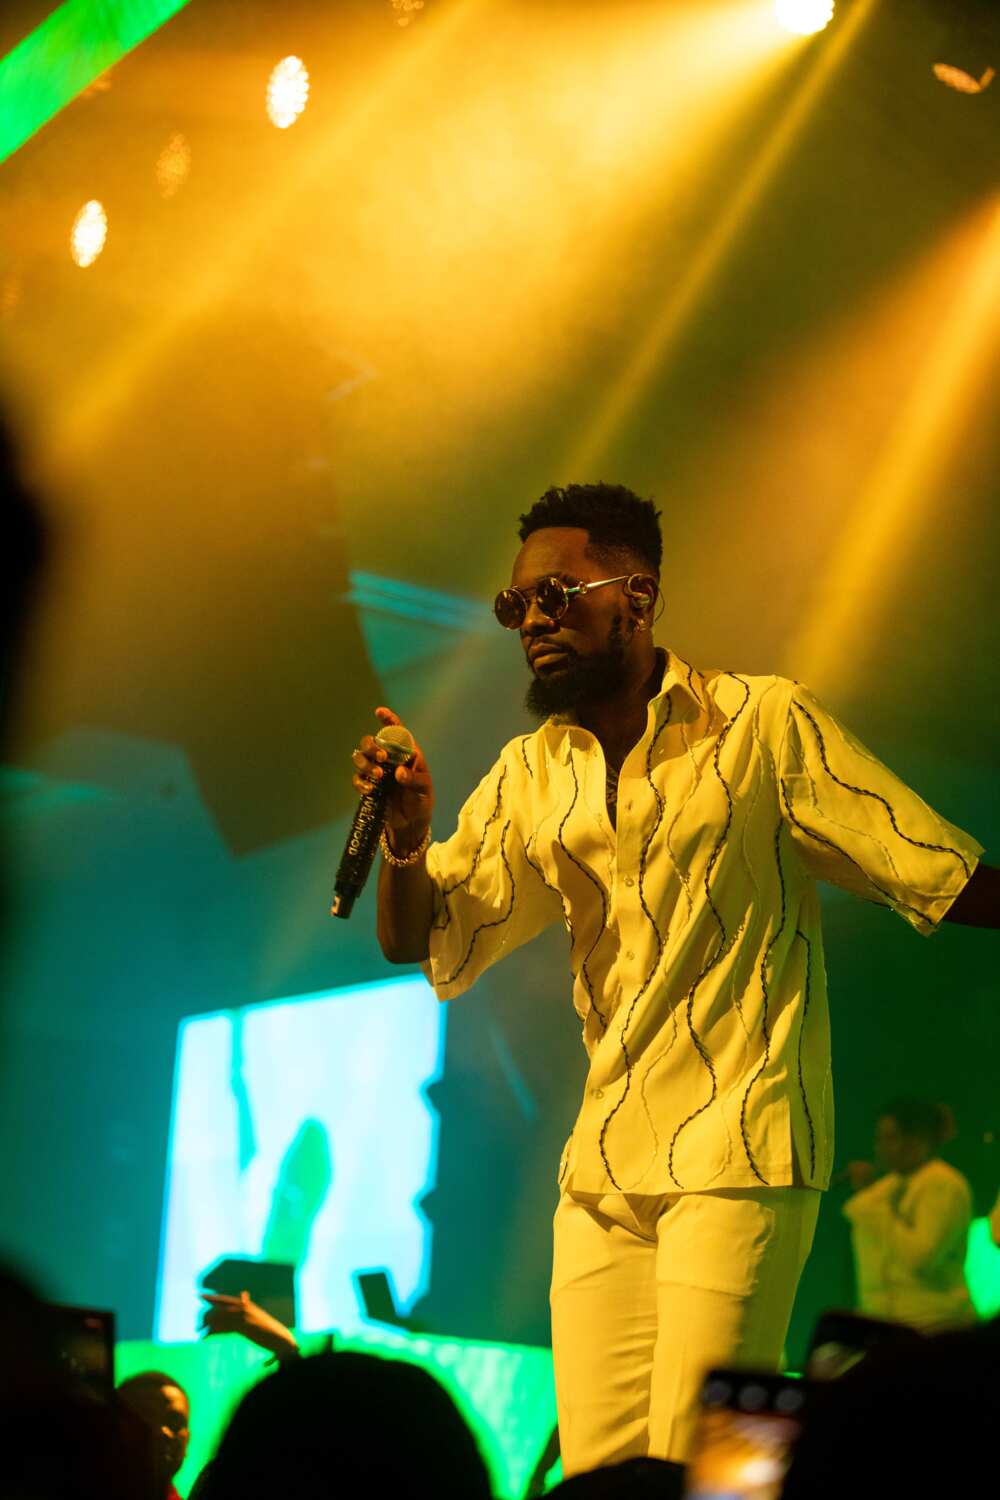 Patoranking Closes out 2021 with Show-Stopping Performance at Big Name Concert